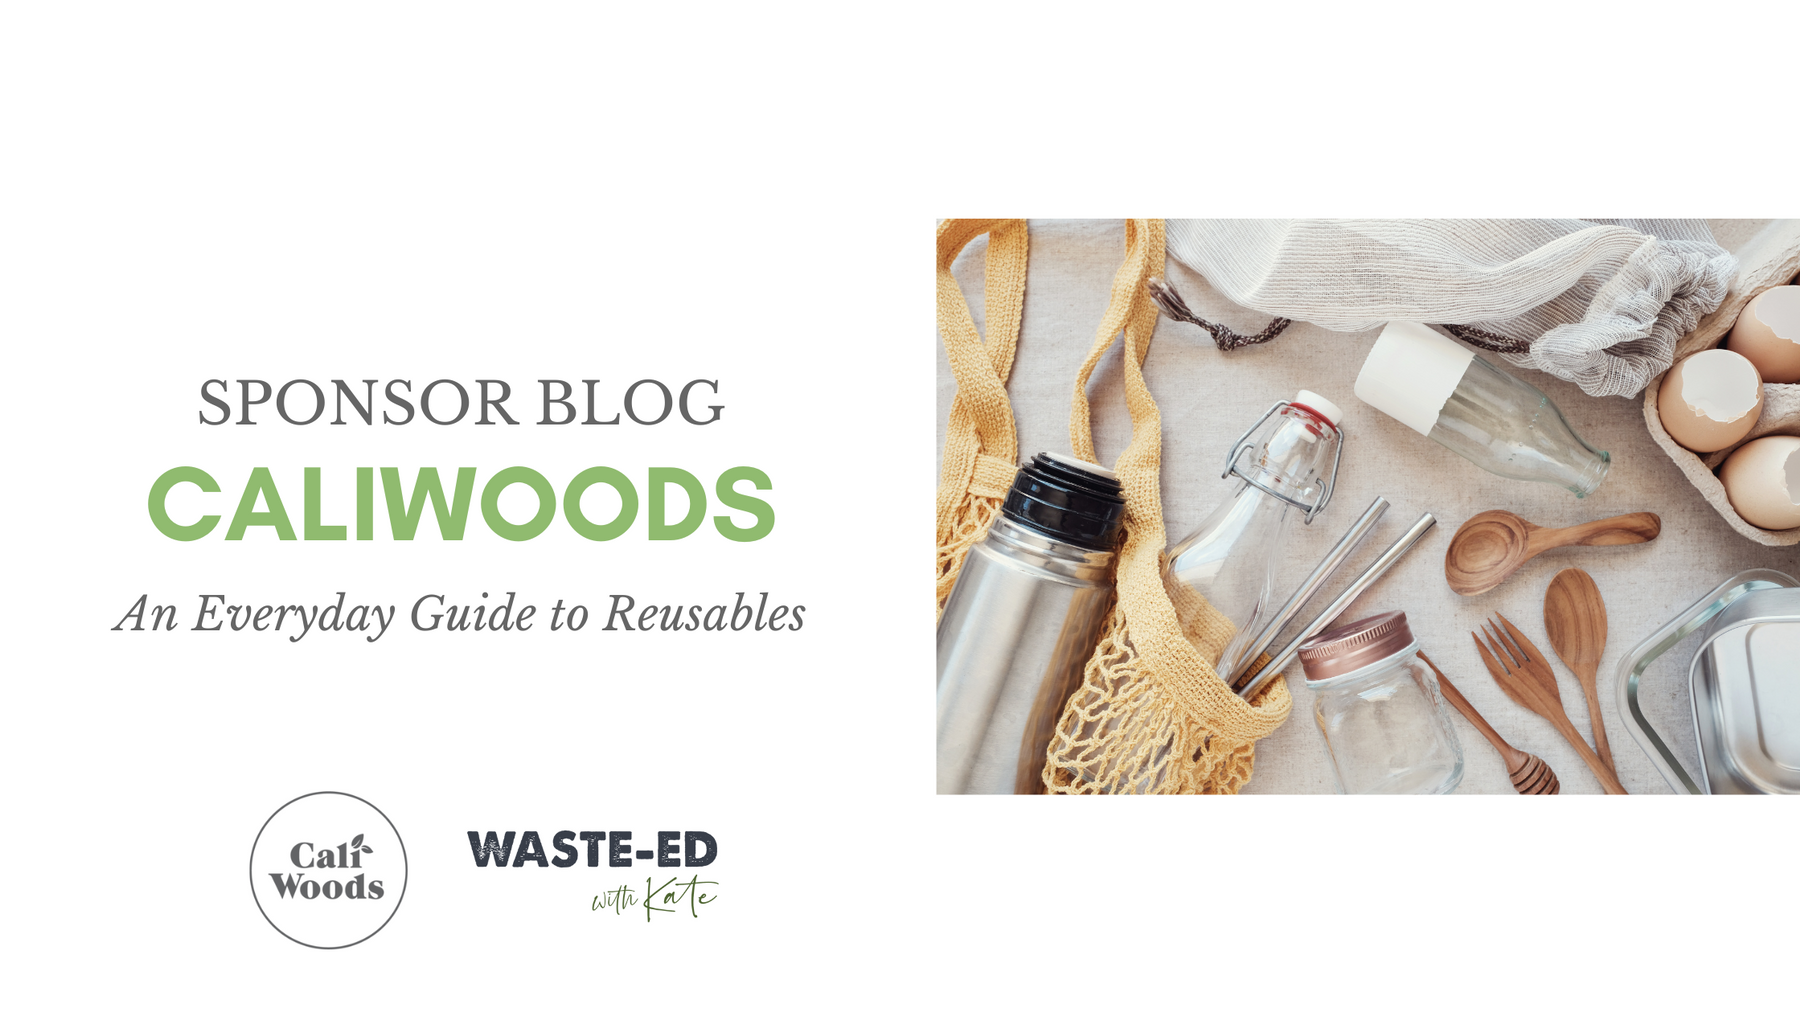 Sponsor Blog: An Everyday Guide to Reusables from Caliwoods!